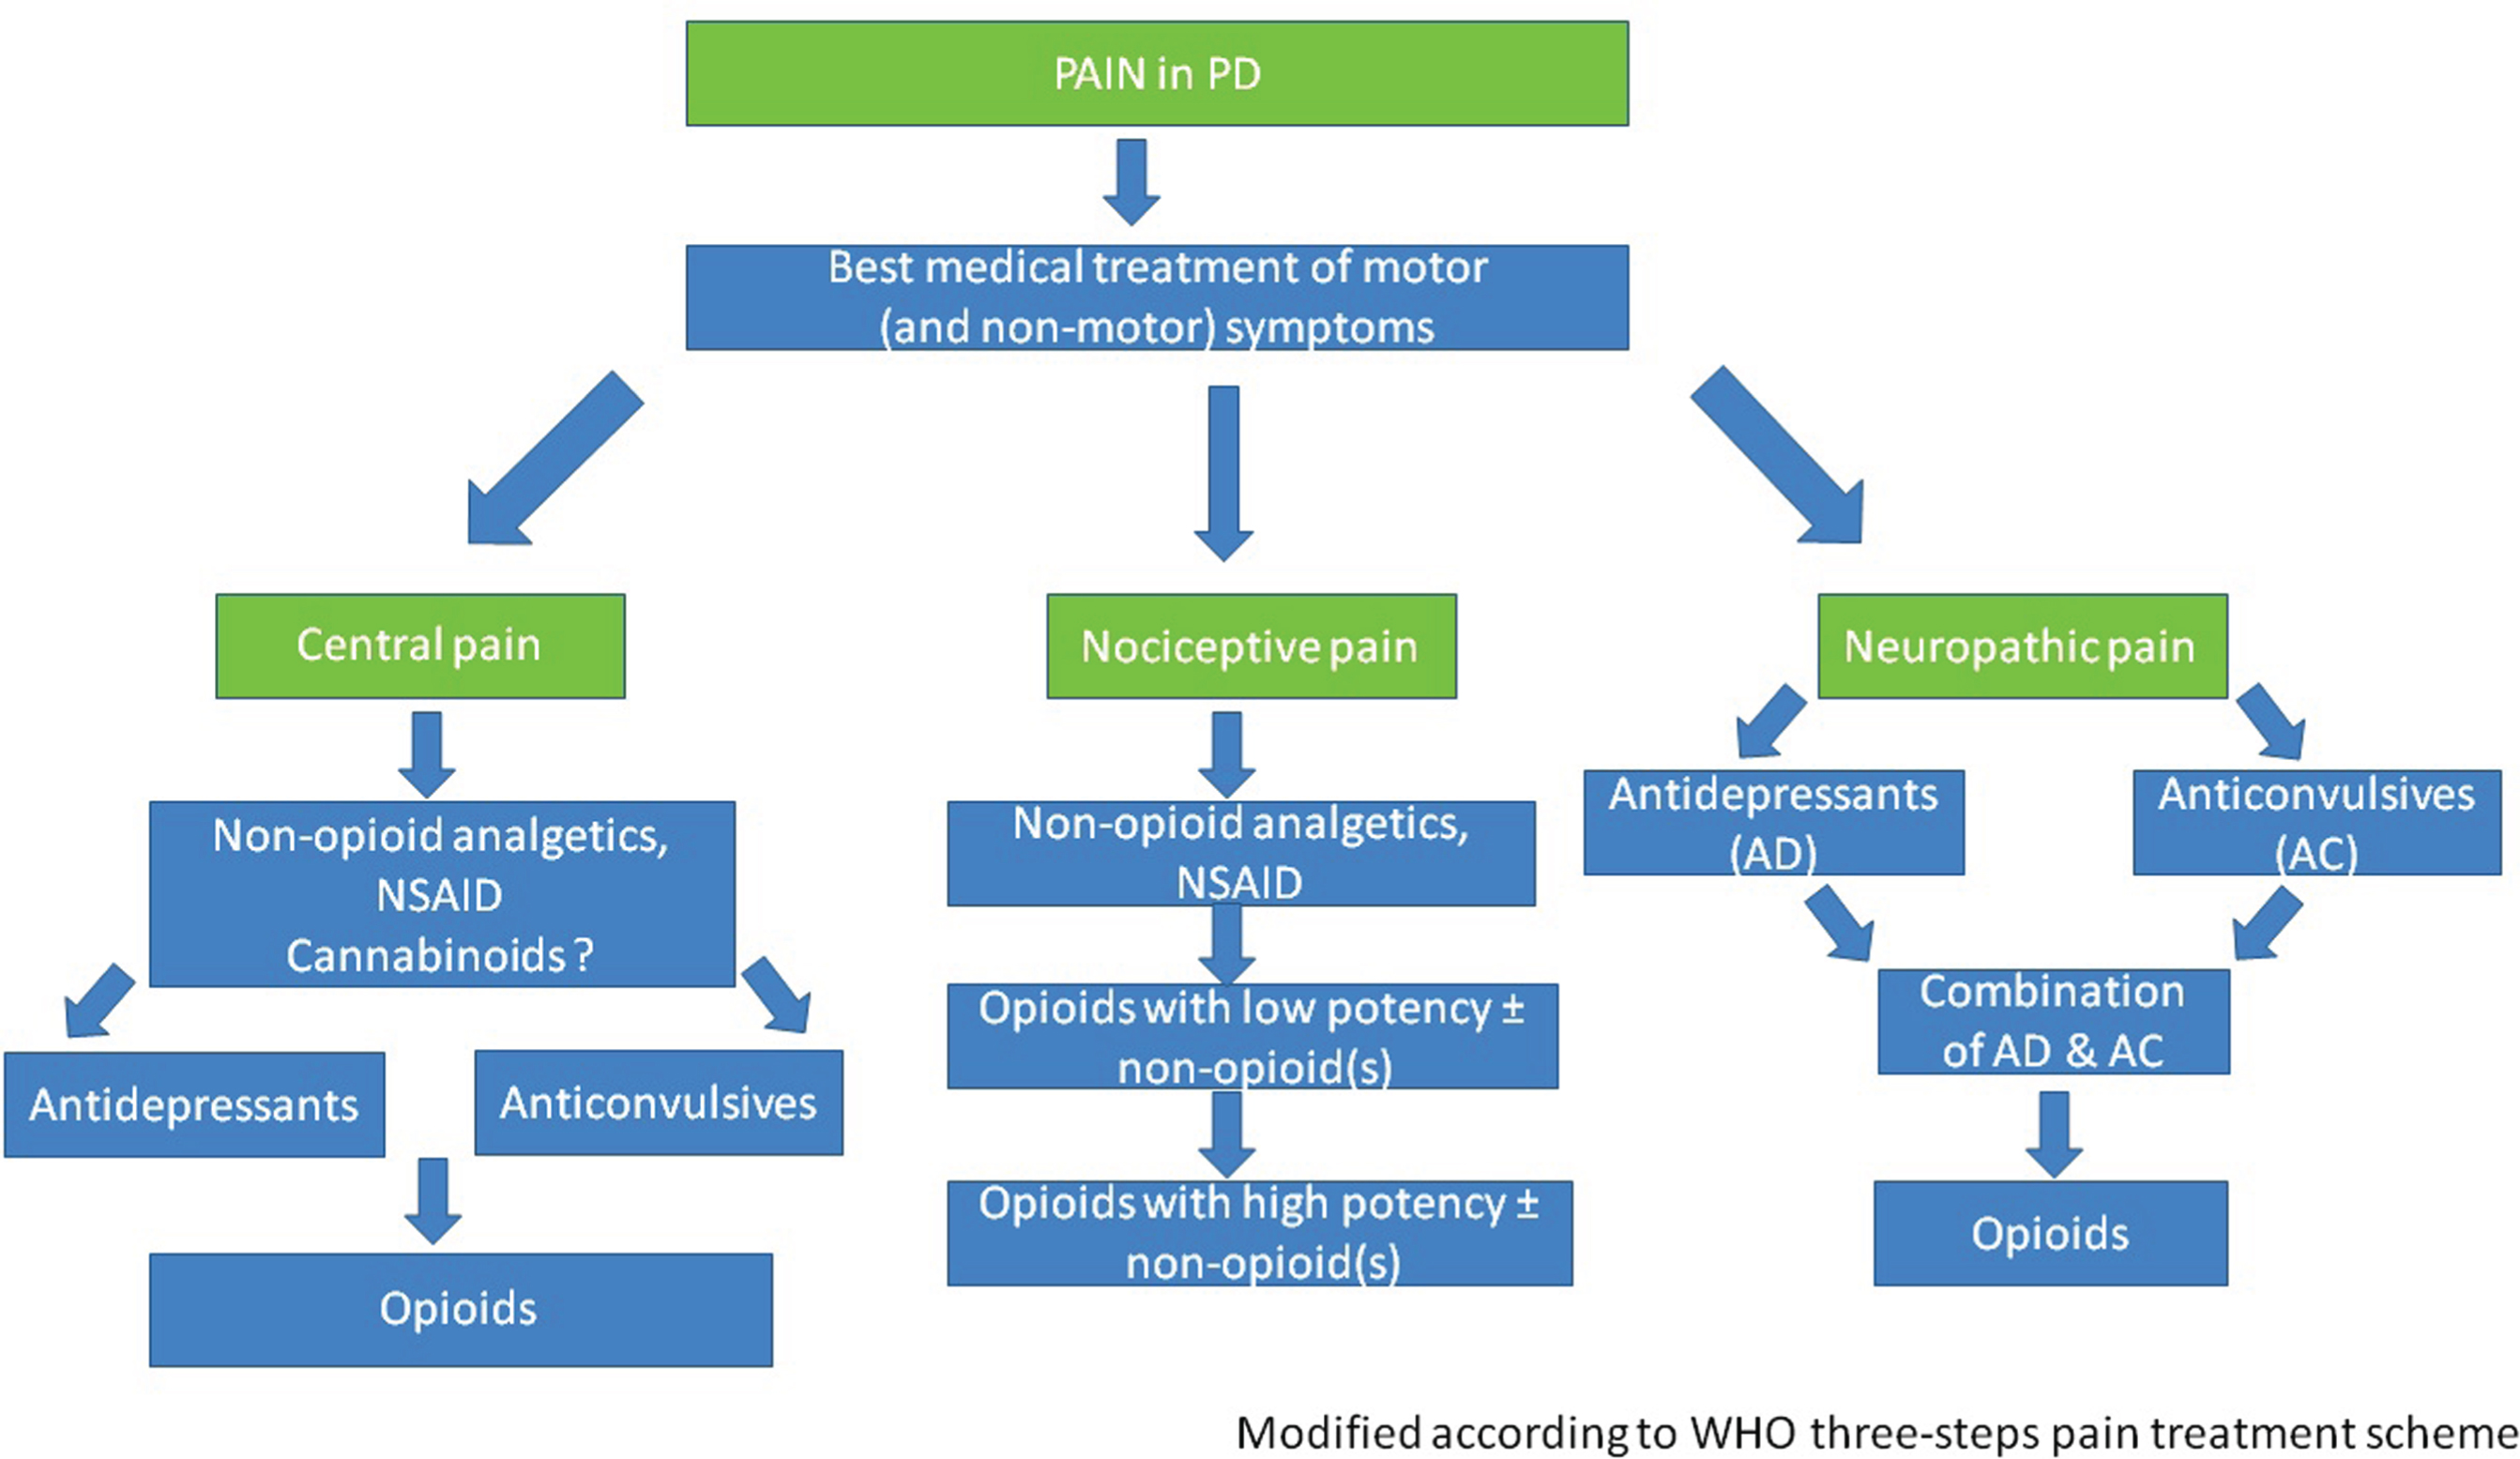 Algorithm suggested for pain therapy in PD.